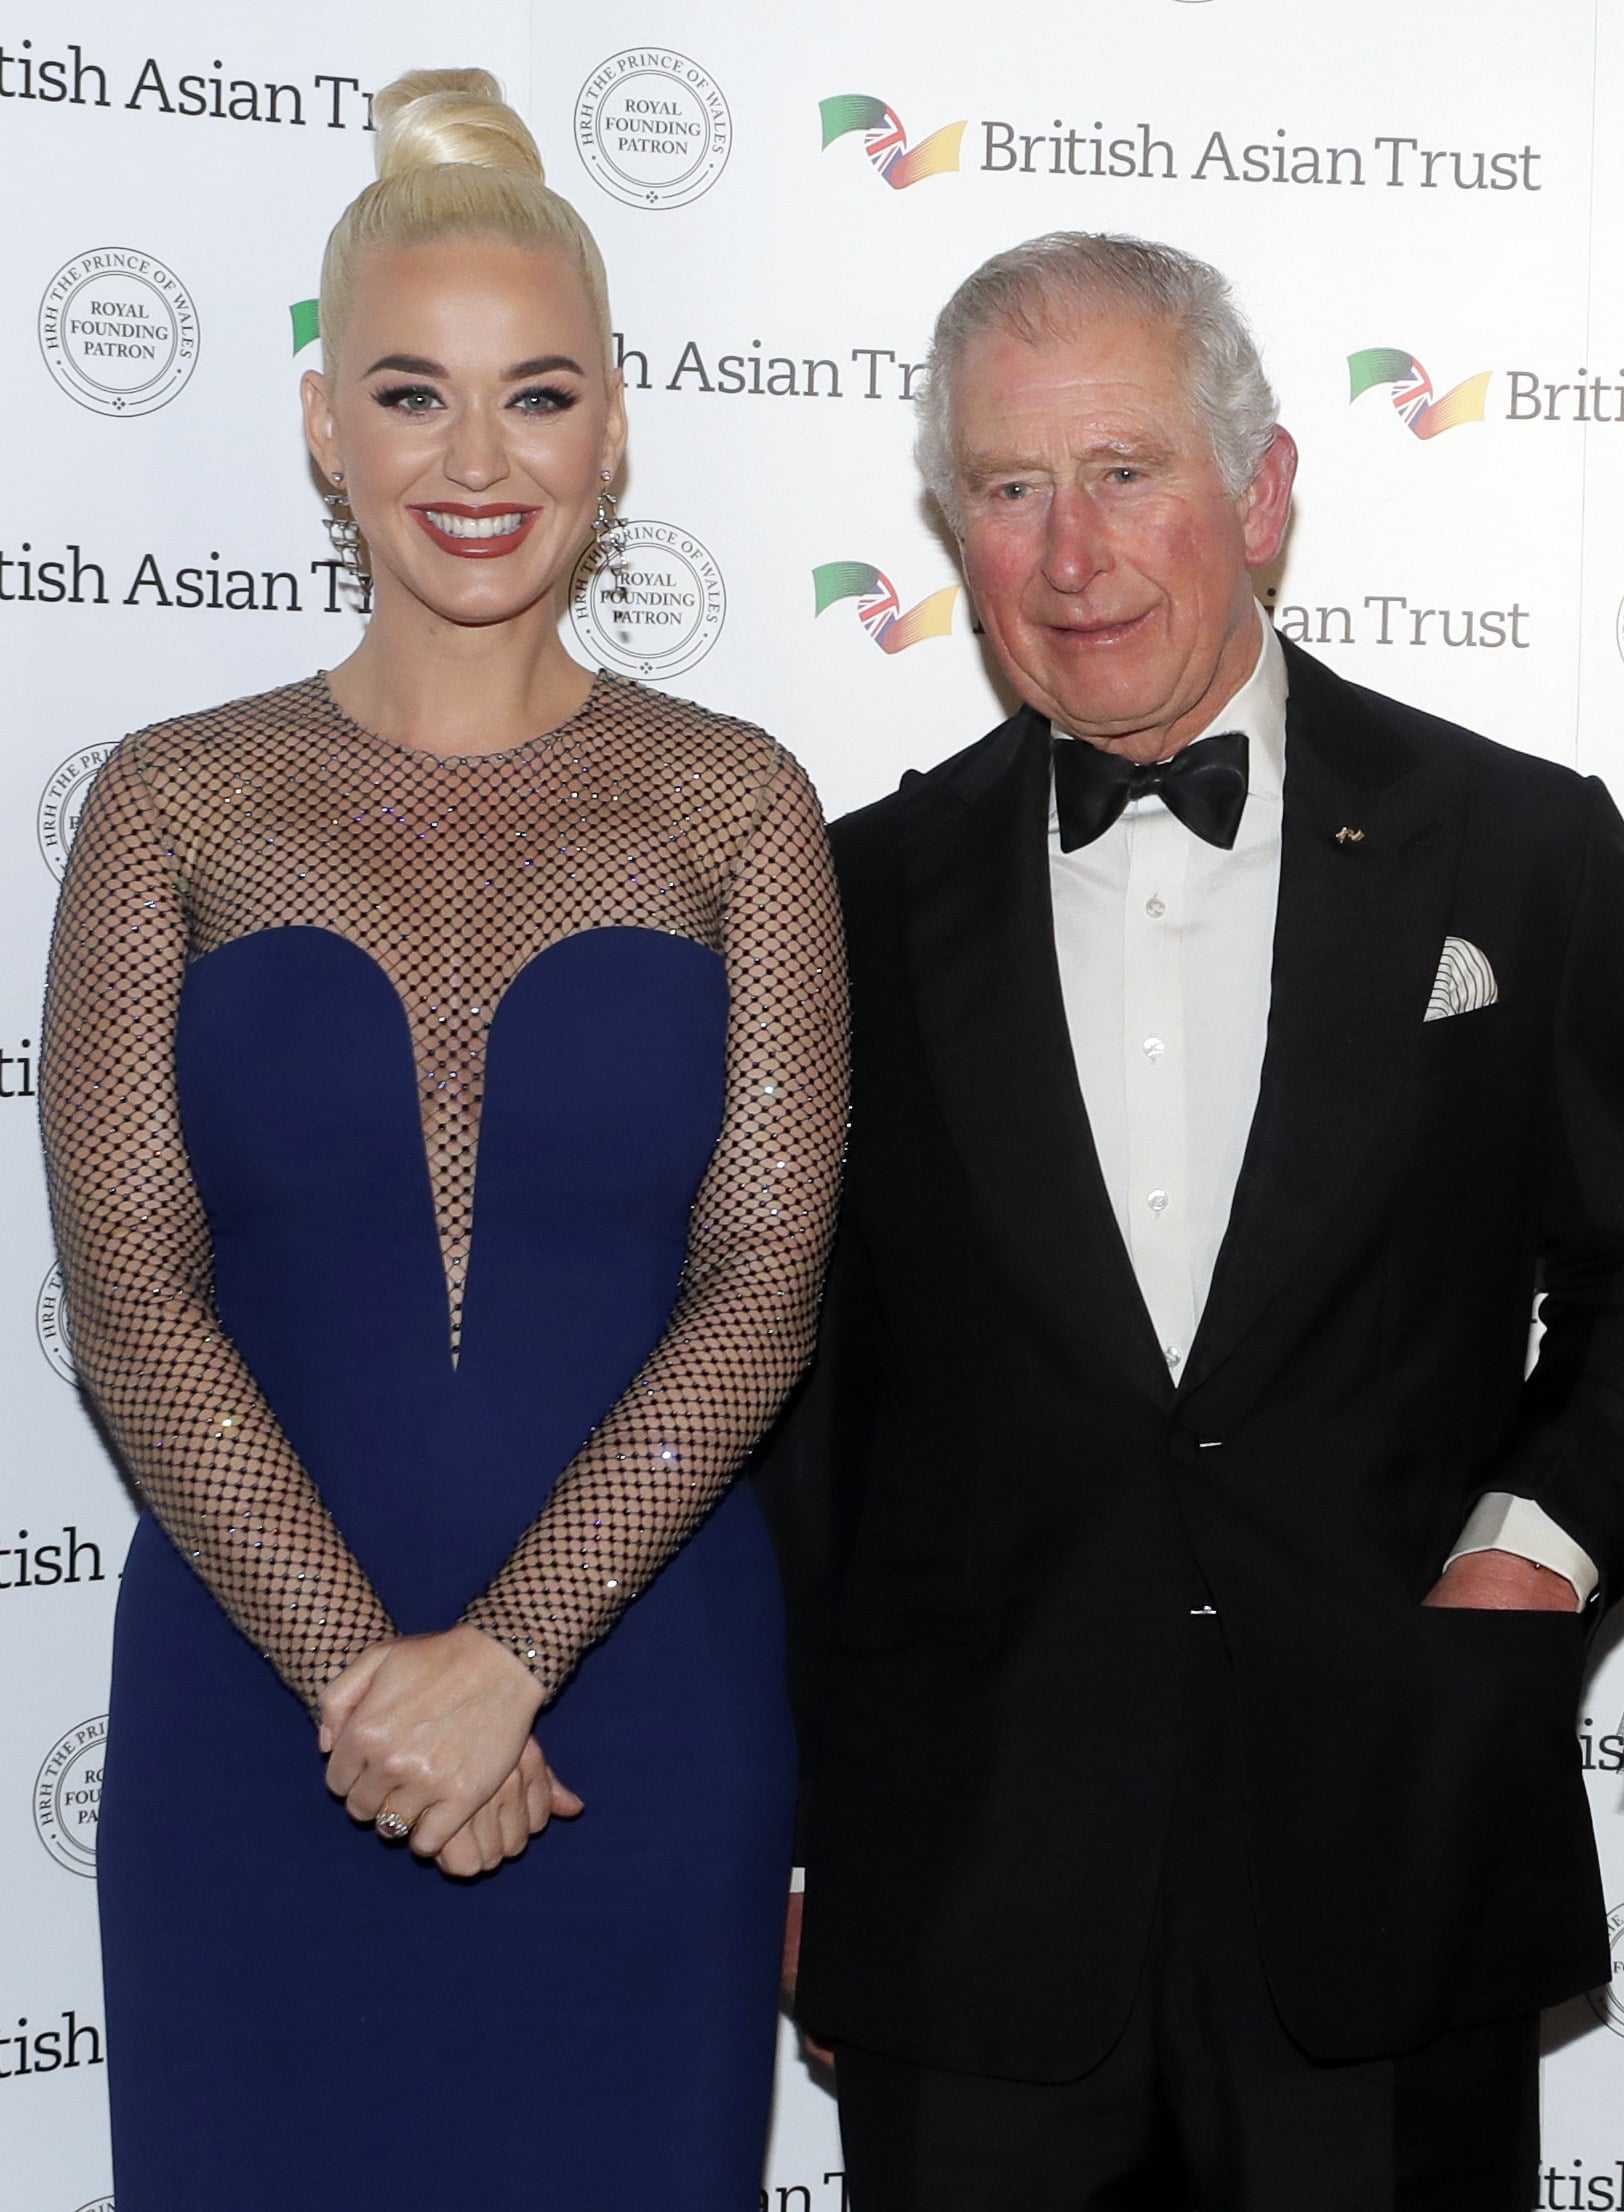 LONDON, UNITED KINGDOM - FEBRUARY 04: Prince Charles, Prince of Wales, Royal Founding Patron of the British Asian Trust poses with American musician Katy Perry as they arrive to attend a reception for supporters of the British Asian Trust on February 4, 2020 in London, England. (Photo by Kirsty Wigglesworth - WPA Pool/ Getty Images)